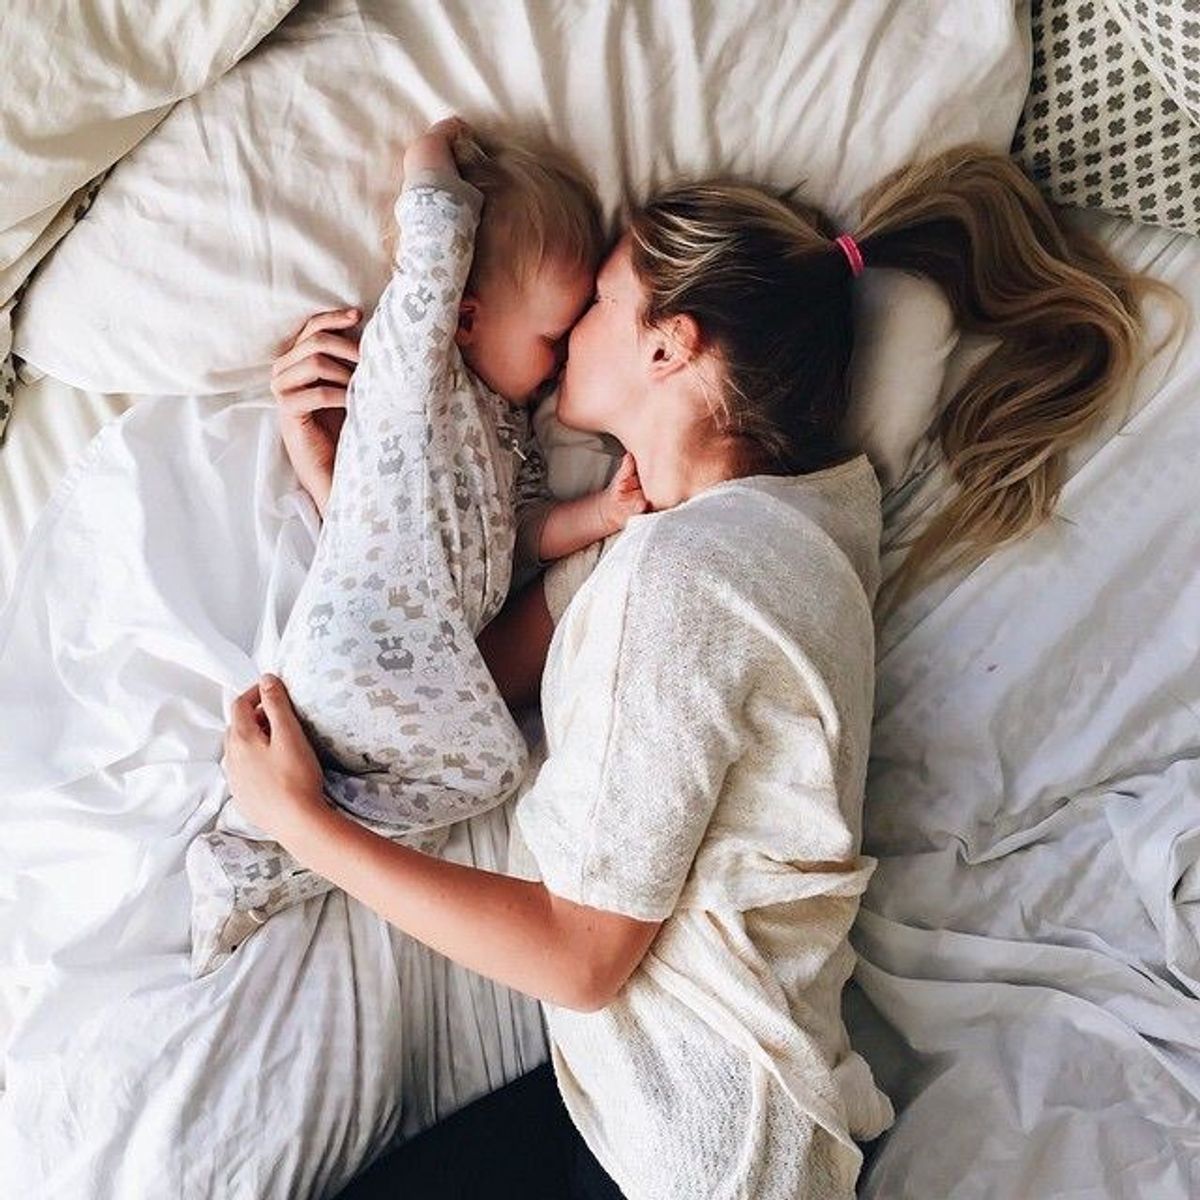 6 Things I Wish Someone Had Told Me About Becoming A Mom